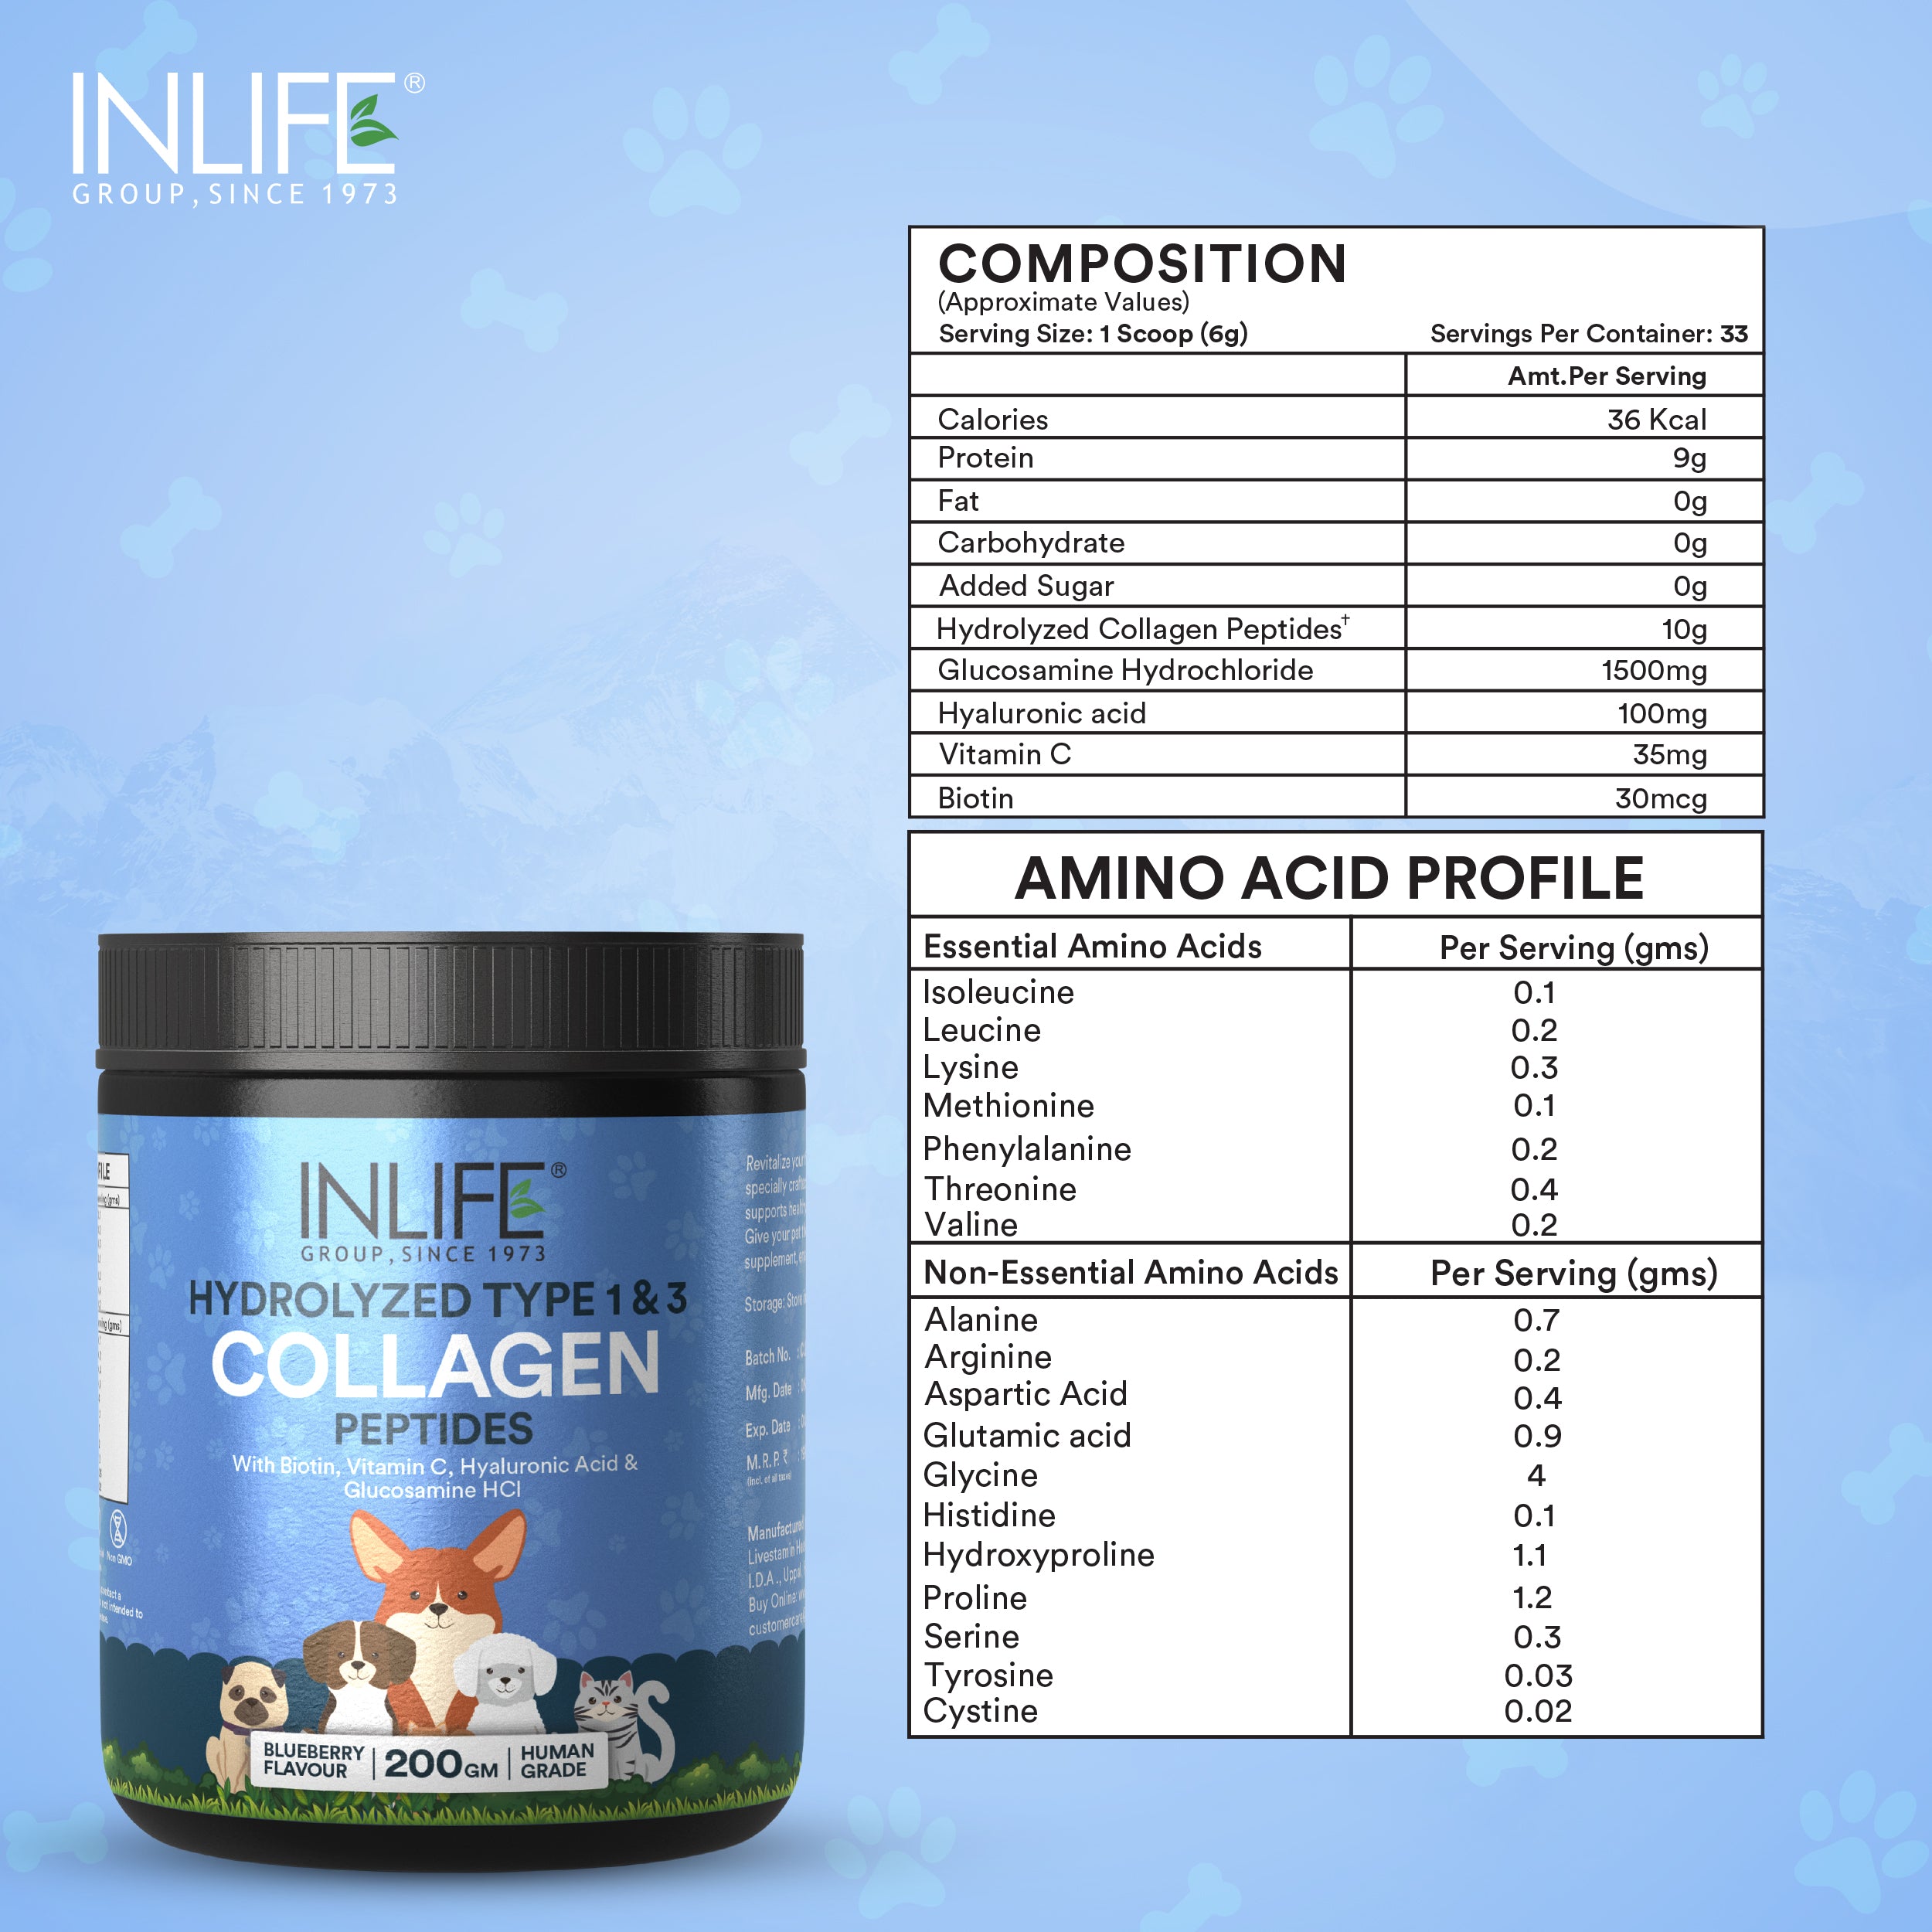 Inlife Hydrolyzed Collagen Powder Pet Supplement for Dogs & Cats